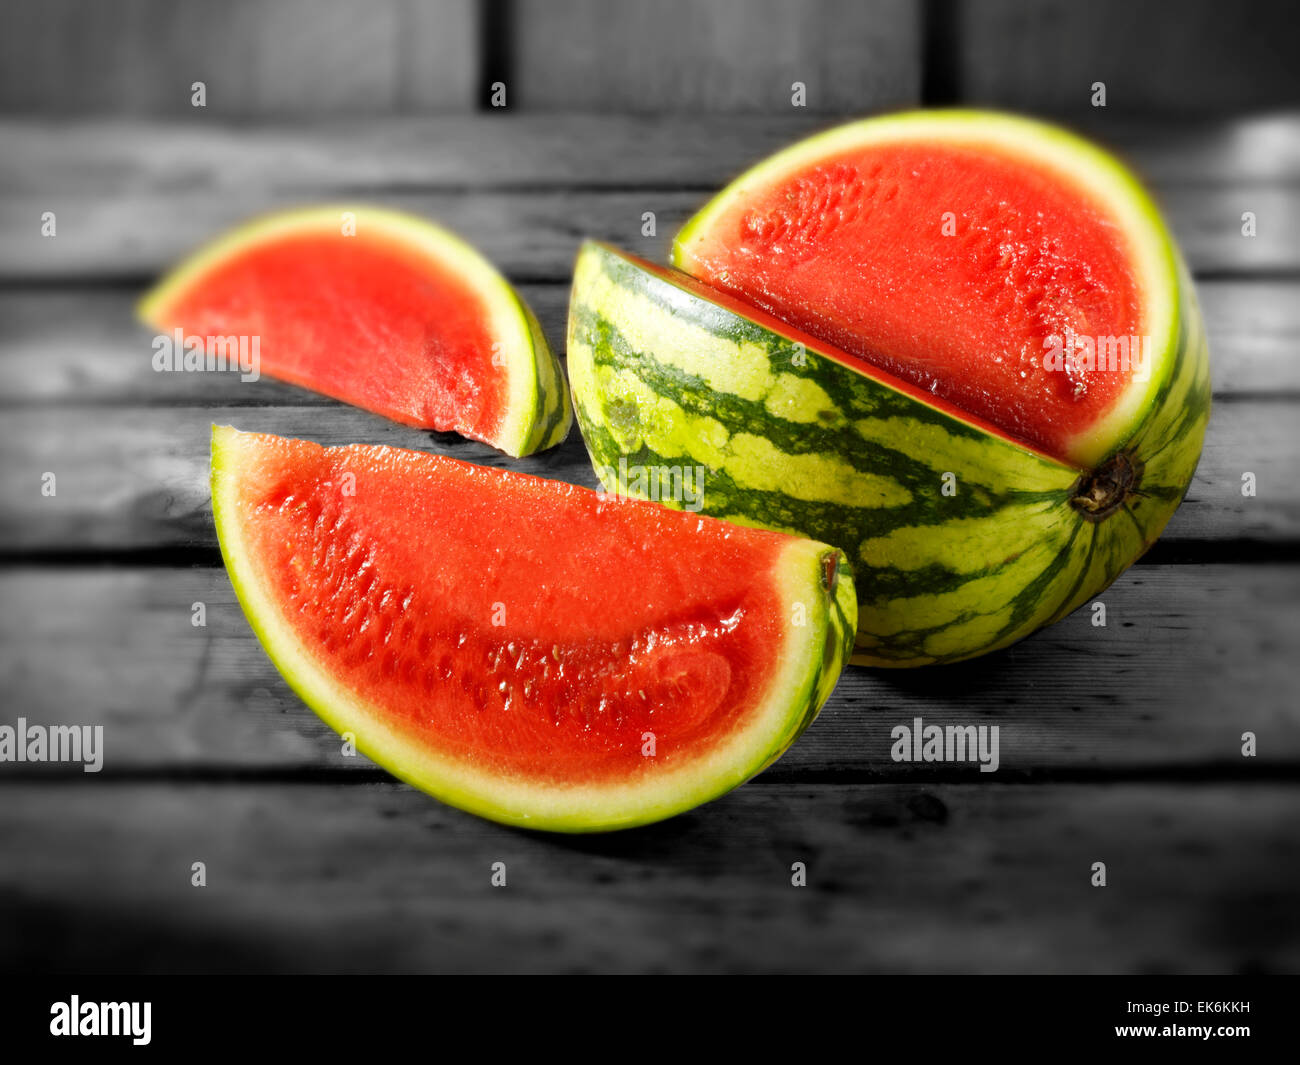 Fresh cut red watermelon, whole and sliced, on a wood background setting Stock Photo